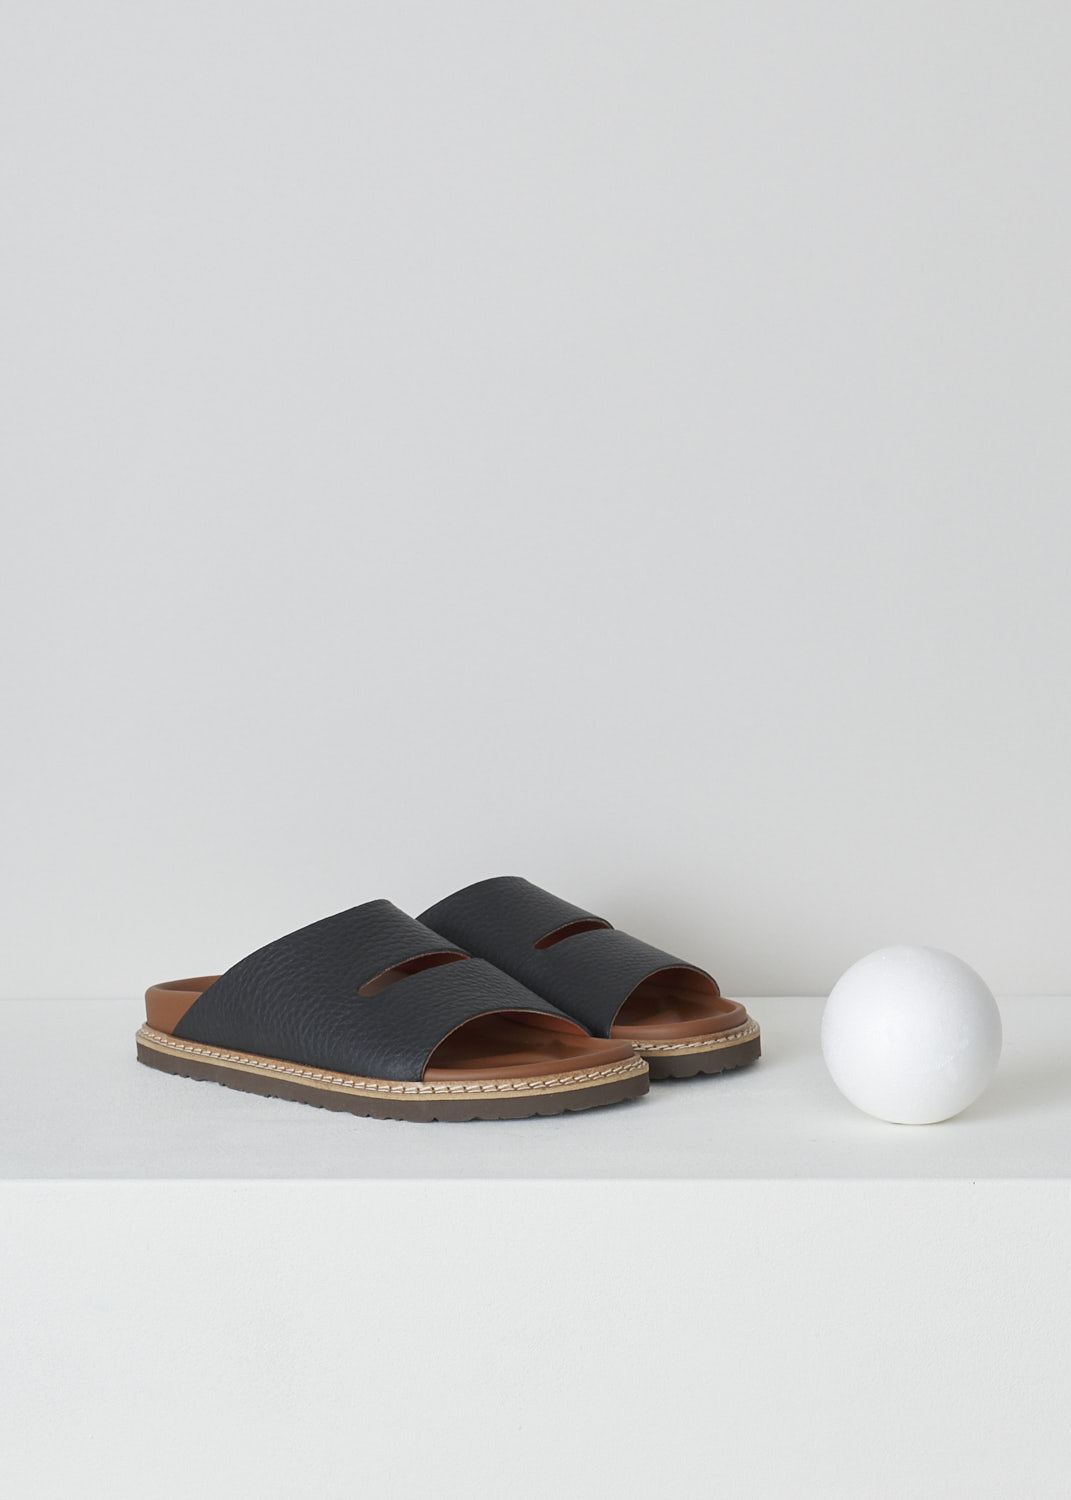 SOFIE Dâ€™HOORE, FABIA SLIP-ON SANDALS IN BLACK, FABIA_LNAT_BLACK, Black, Front, These slip-on sandals in the black have a wide footbed with stitching along the soles. A broad strap with a horizontal cut-out goes across the vamp. These sandals have a round open-toe.
